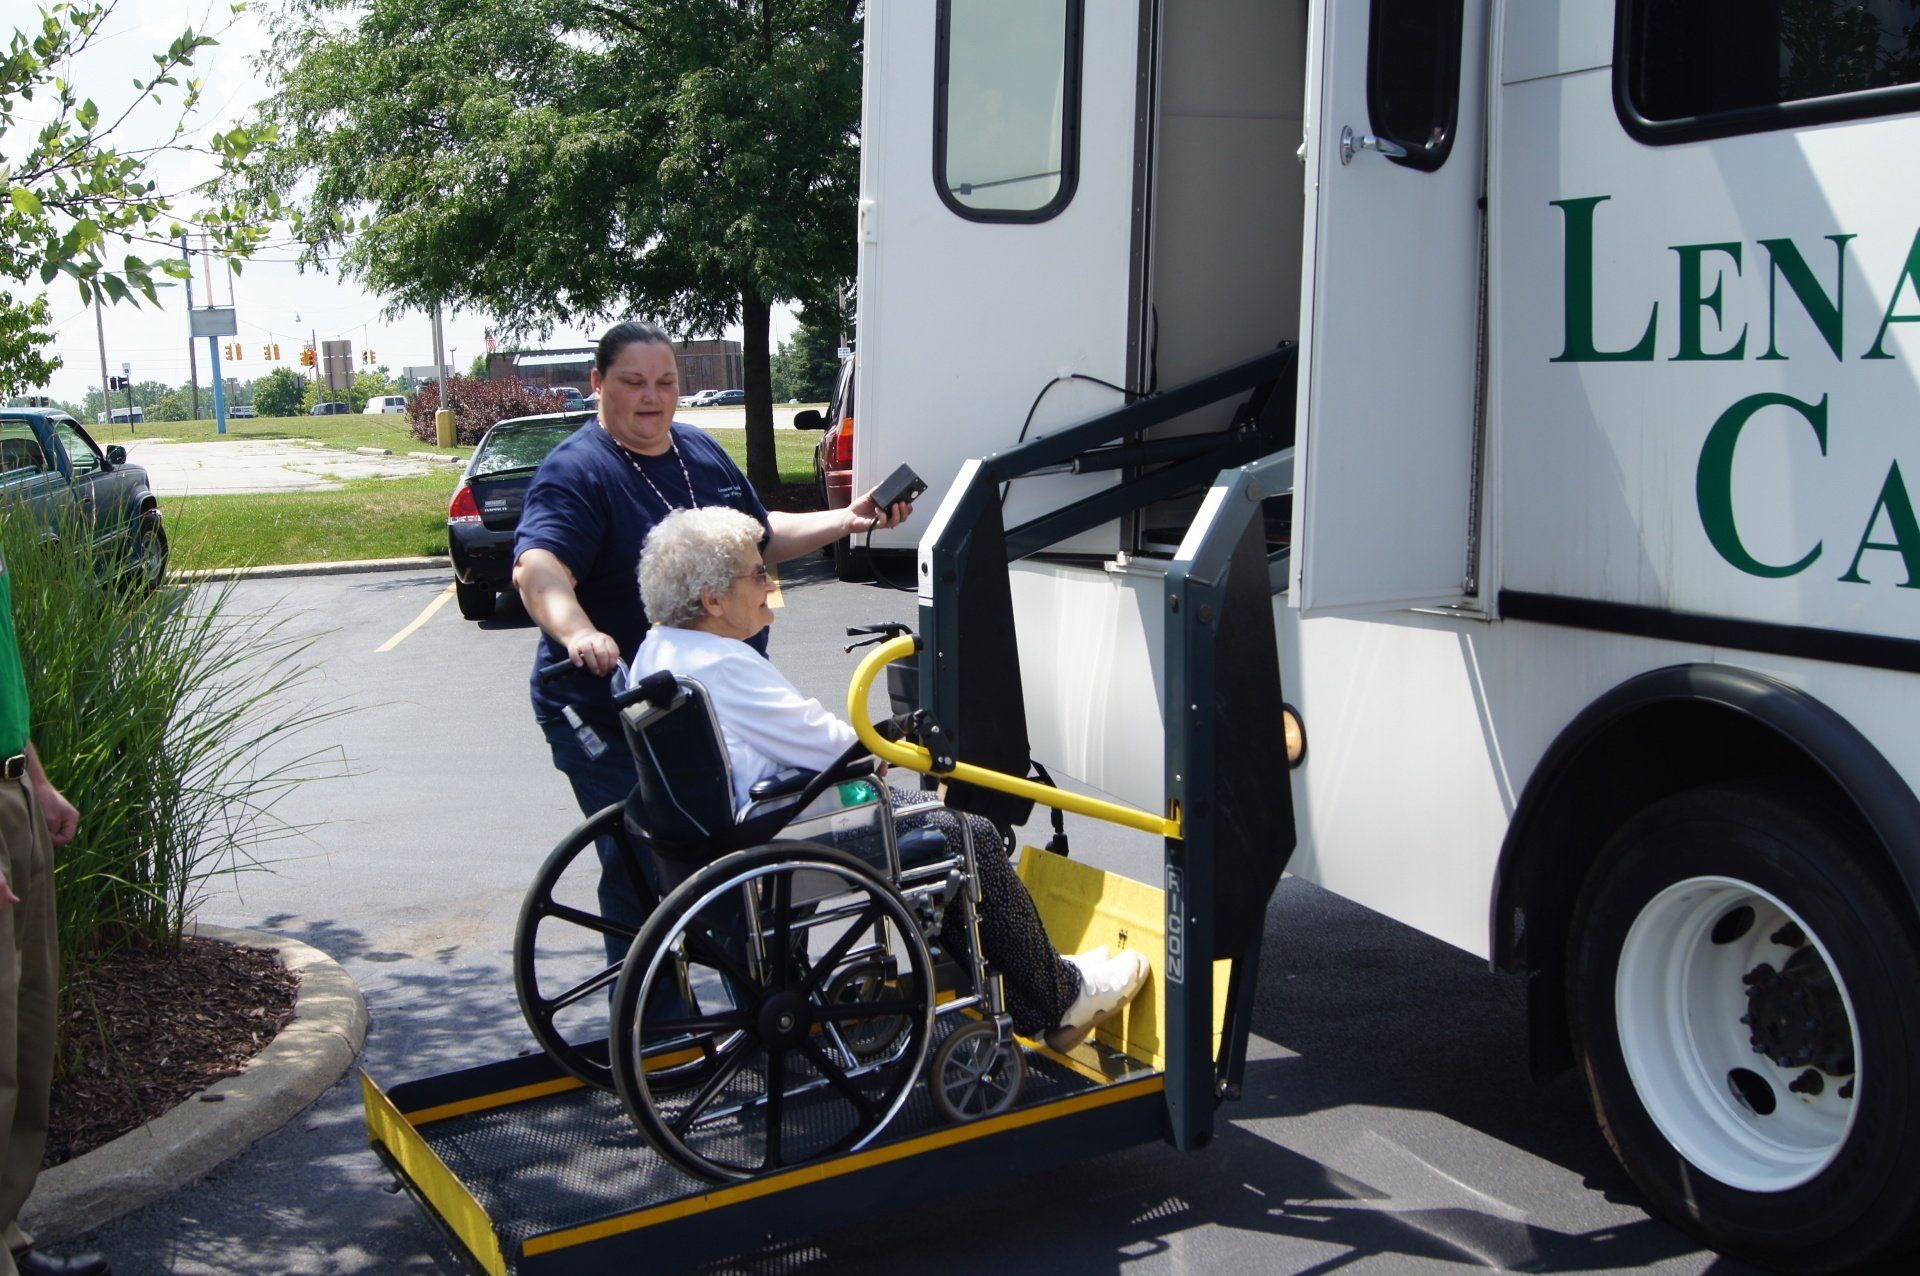 Nurse Helping Elder get on Bus during a Field Trip at Lenawee Medical Care Facility in Adrian, MI